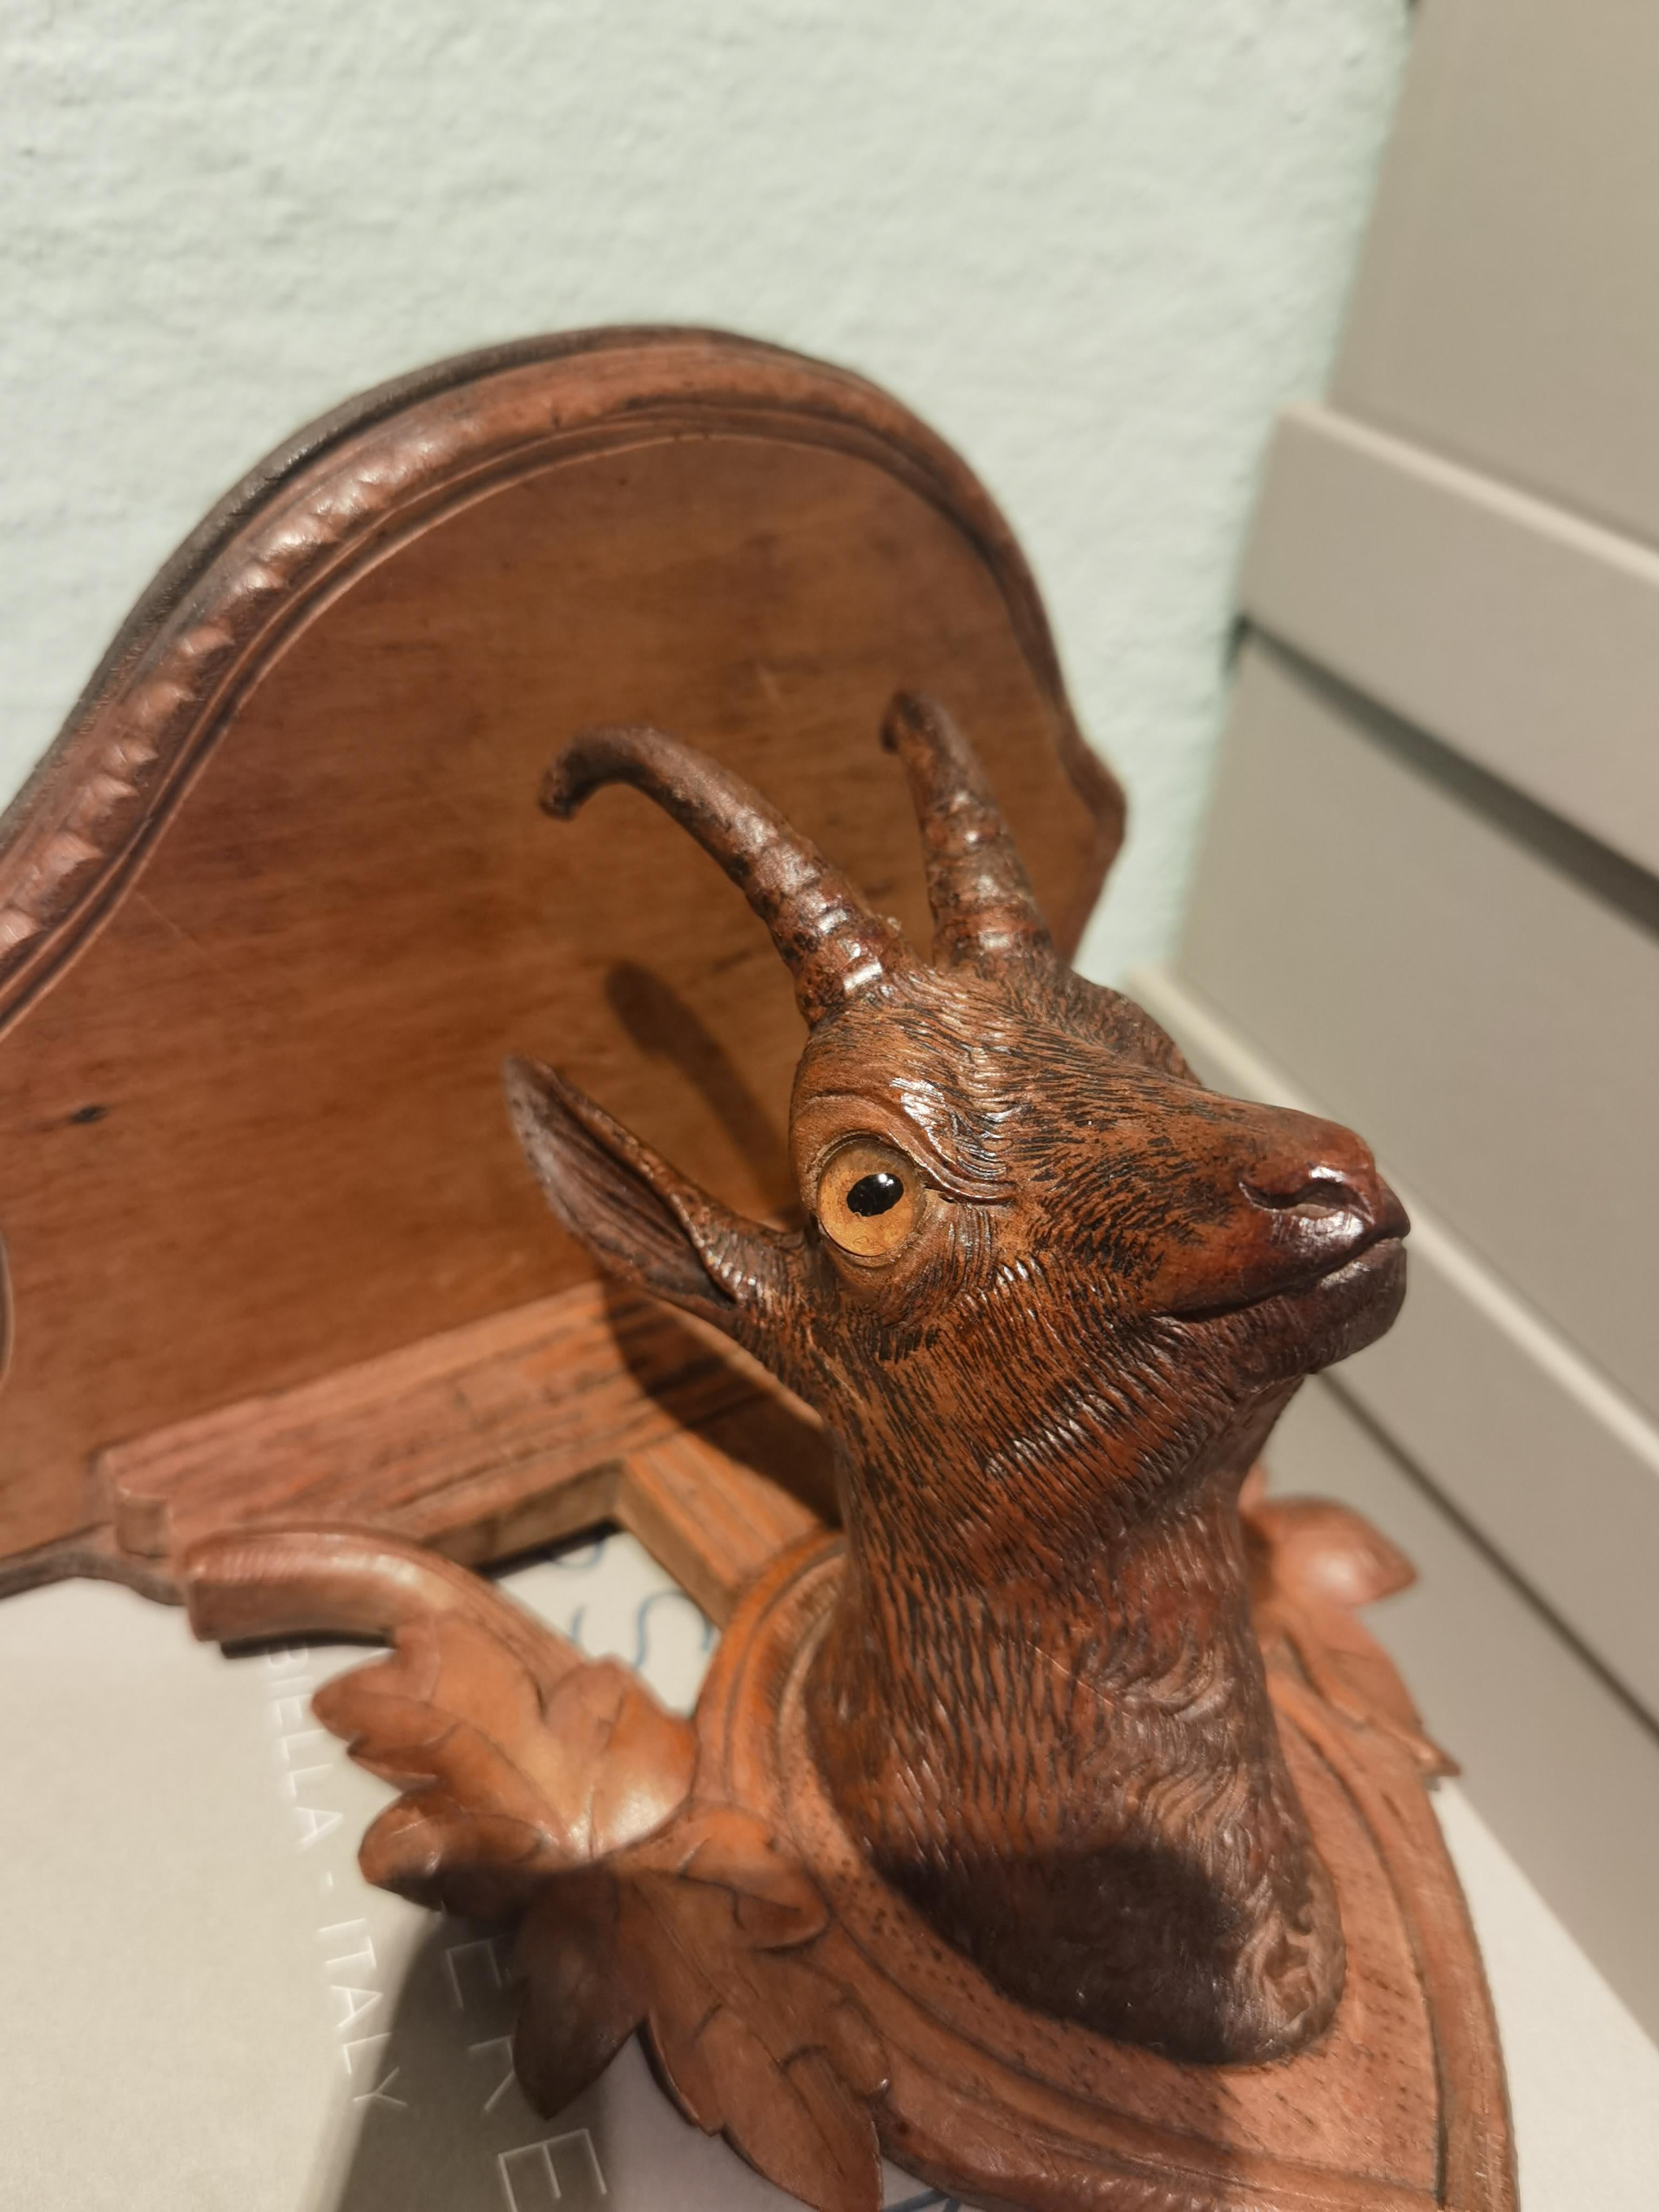 Small charming konsole with a deer head with glass eyes carved from wood mounted on a wood plaque. The plaque is beautiful hand carved with oak leaves. A small wood piece is missing. See last photo.
Very decorative because of the rare small seize.